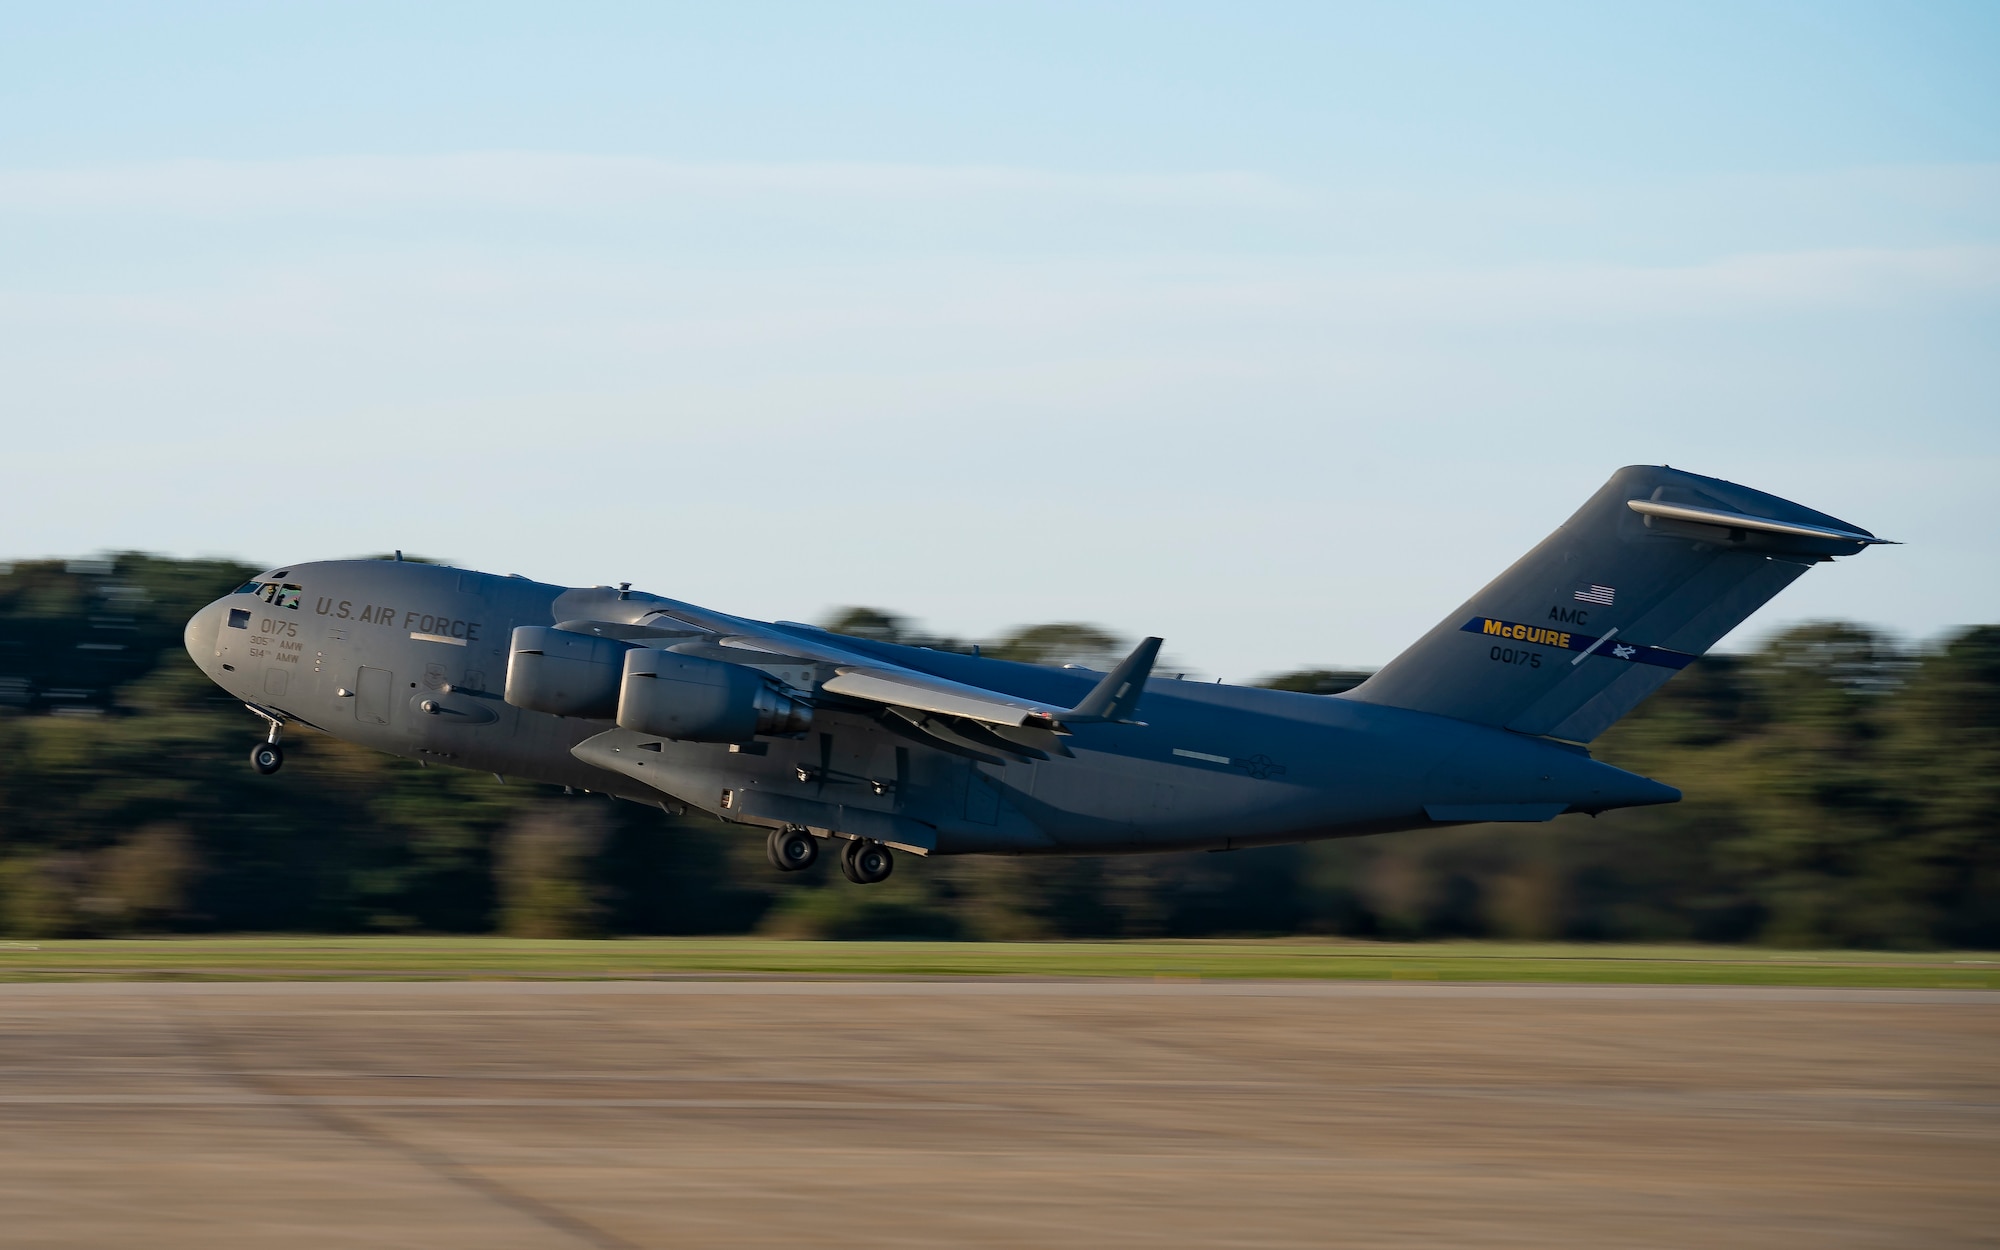 A U.S. Air Force C-17 Globemaster III aircraft assigned to Joint Base McGuire-Dix-Lakehurst takes flight.